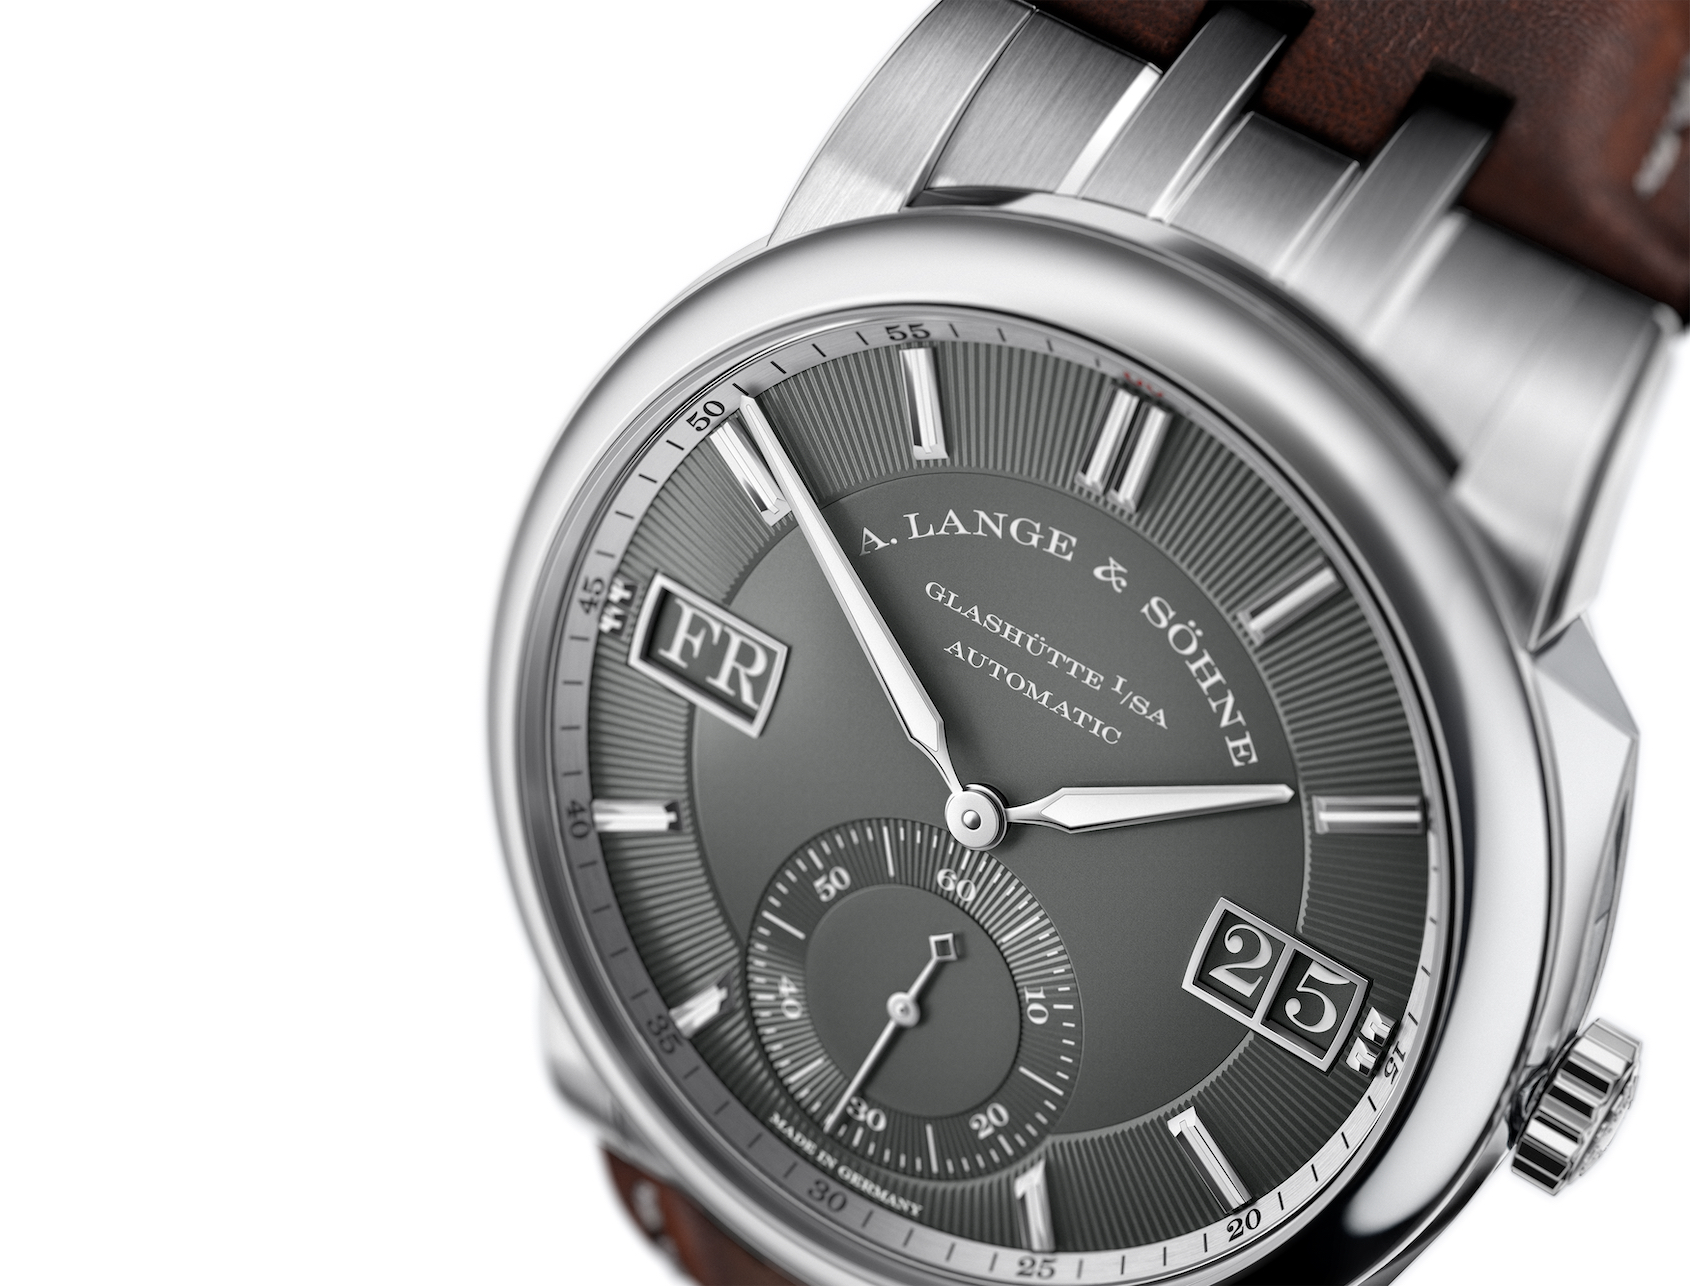 INTRODUCING: A. Lange & Söhne’s Odysseus in white gold with ghost grey dial is a total smokeshow